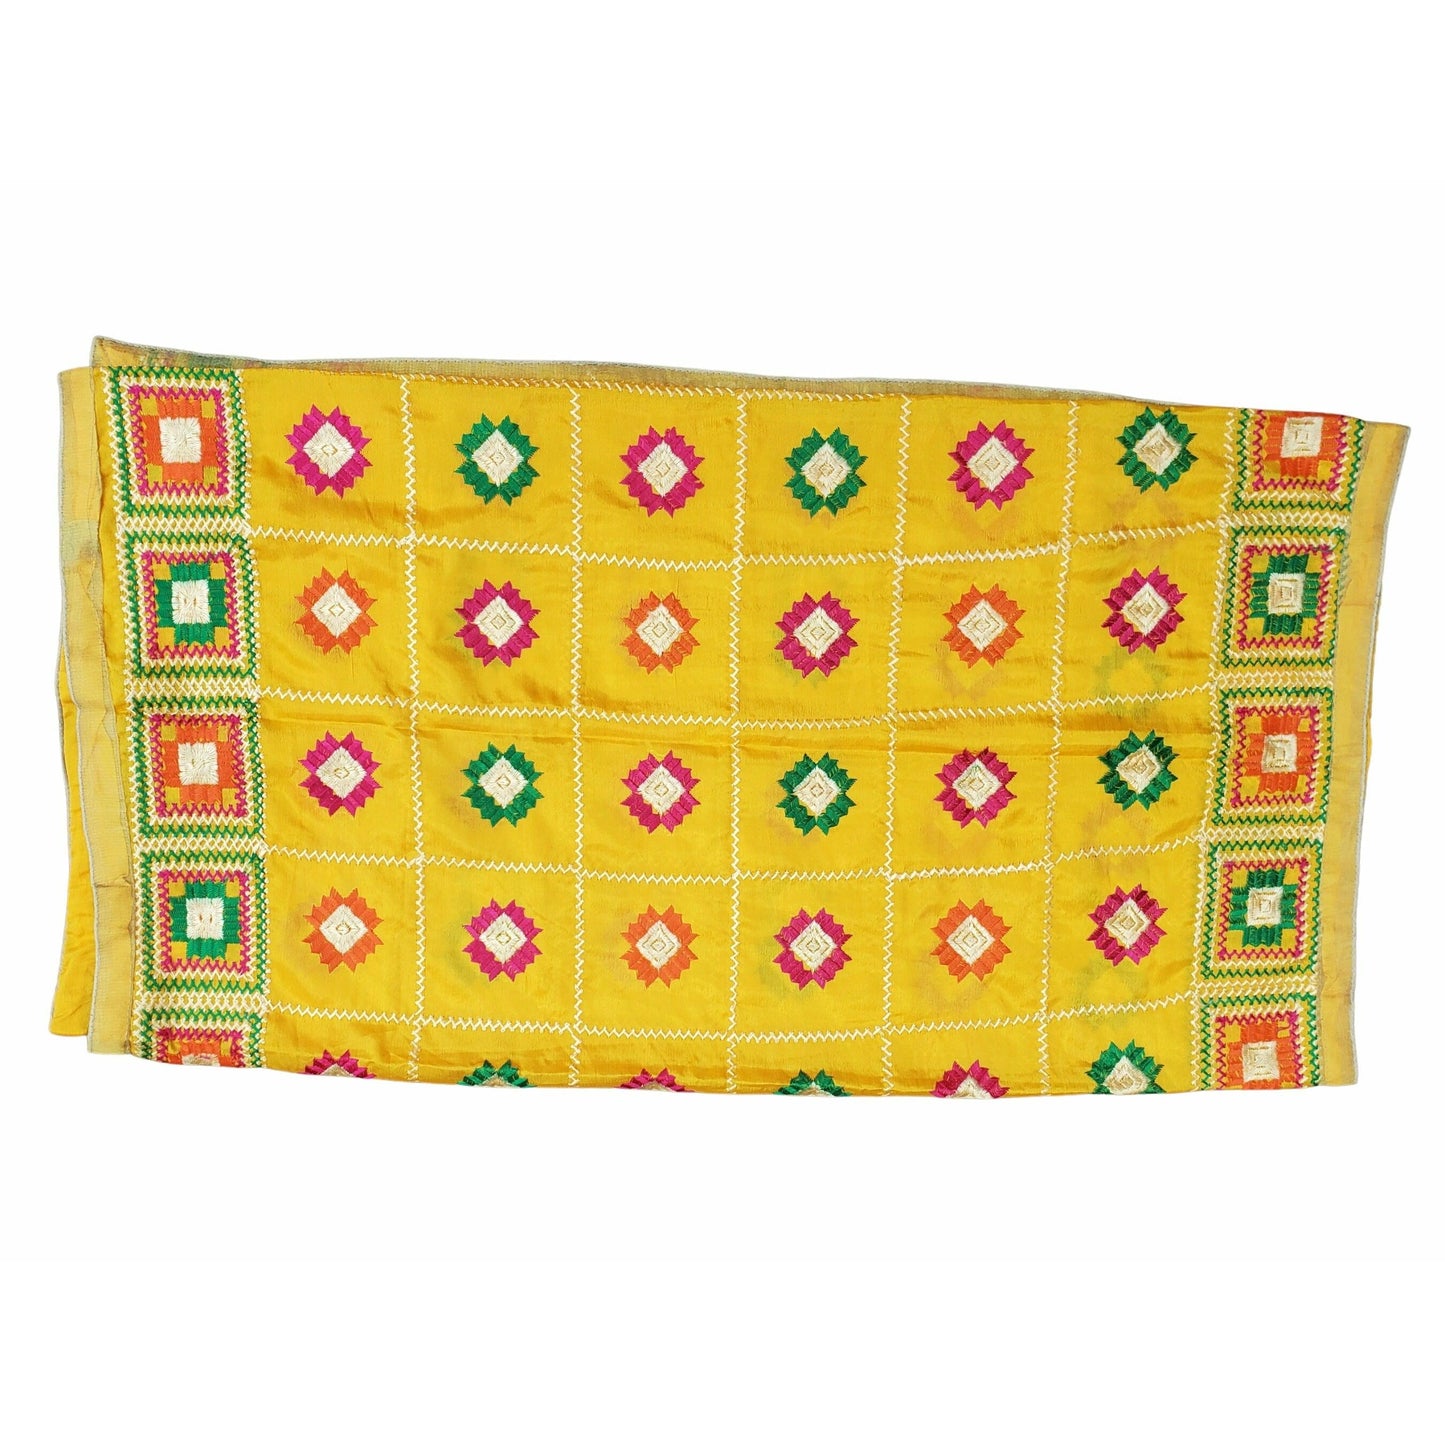 Beautiful Fulkari with Yellow base and multi color flower patter + golden lace on all the borders